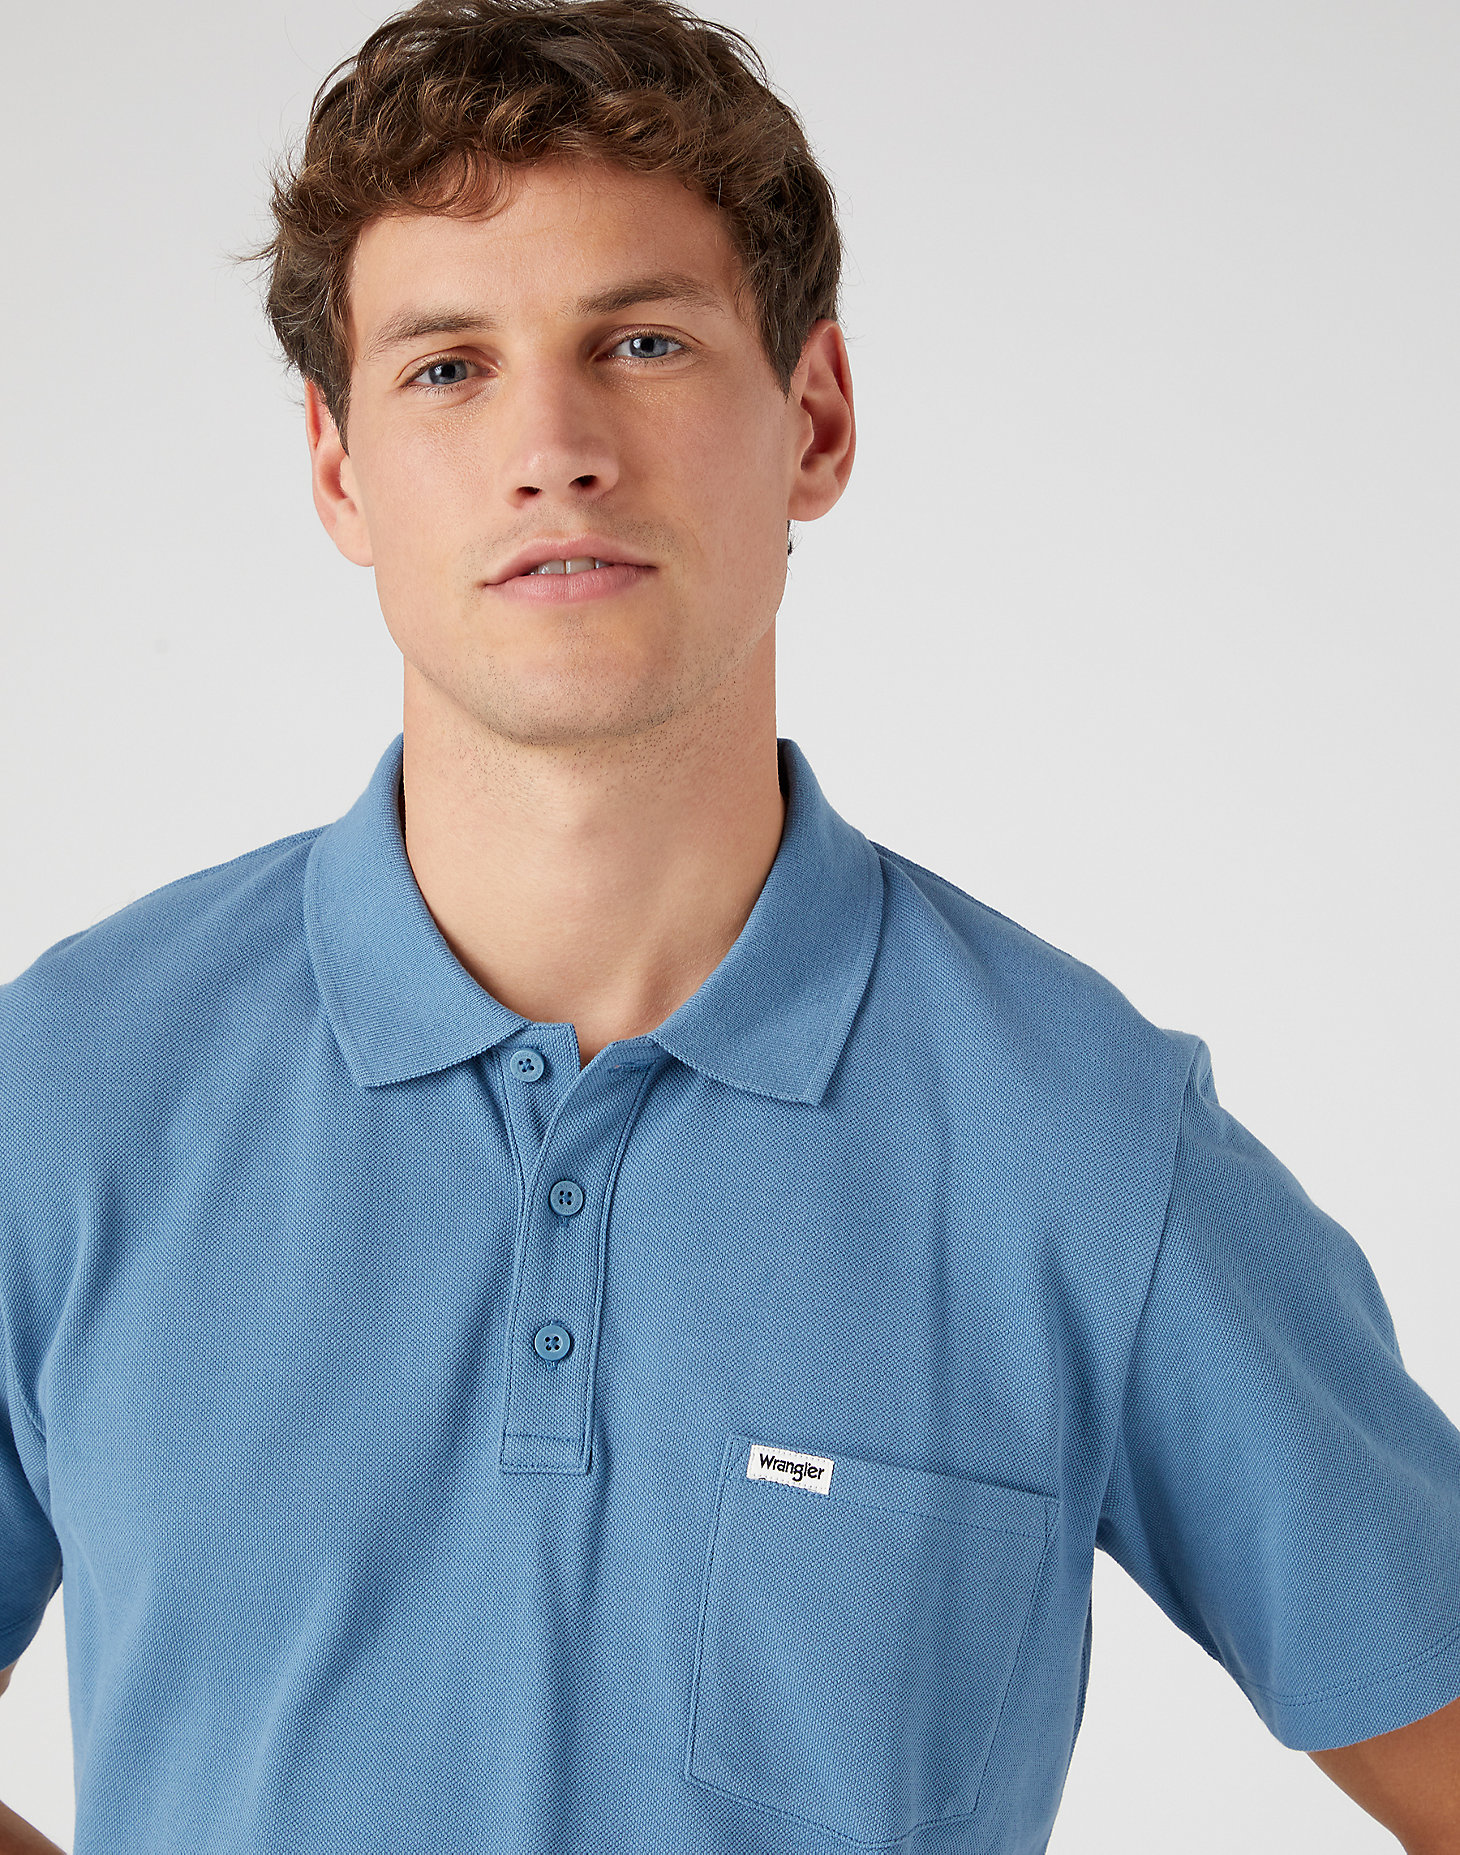 Polo Shirt in Captains Blue alternative view 3